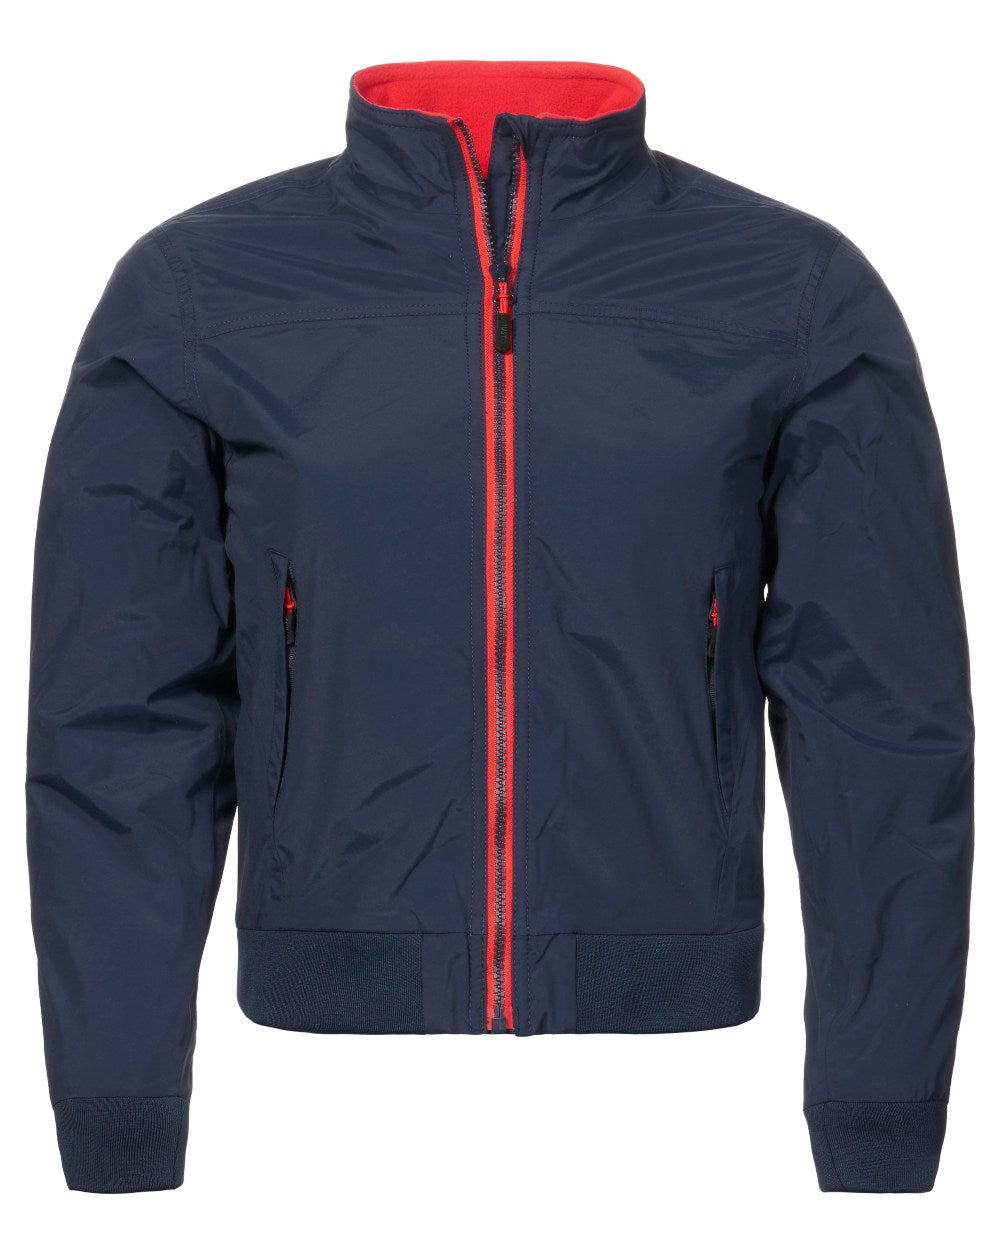 Navy/Red Coloured Musto Childrens Snug Blouson Jacket On A White Background